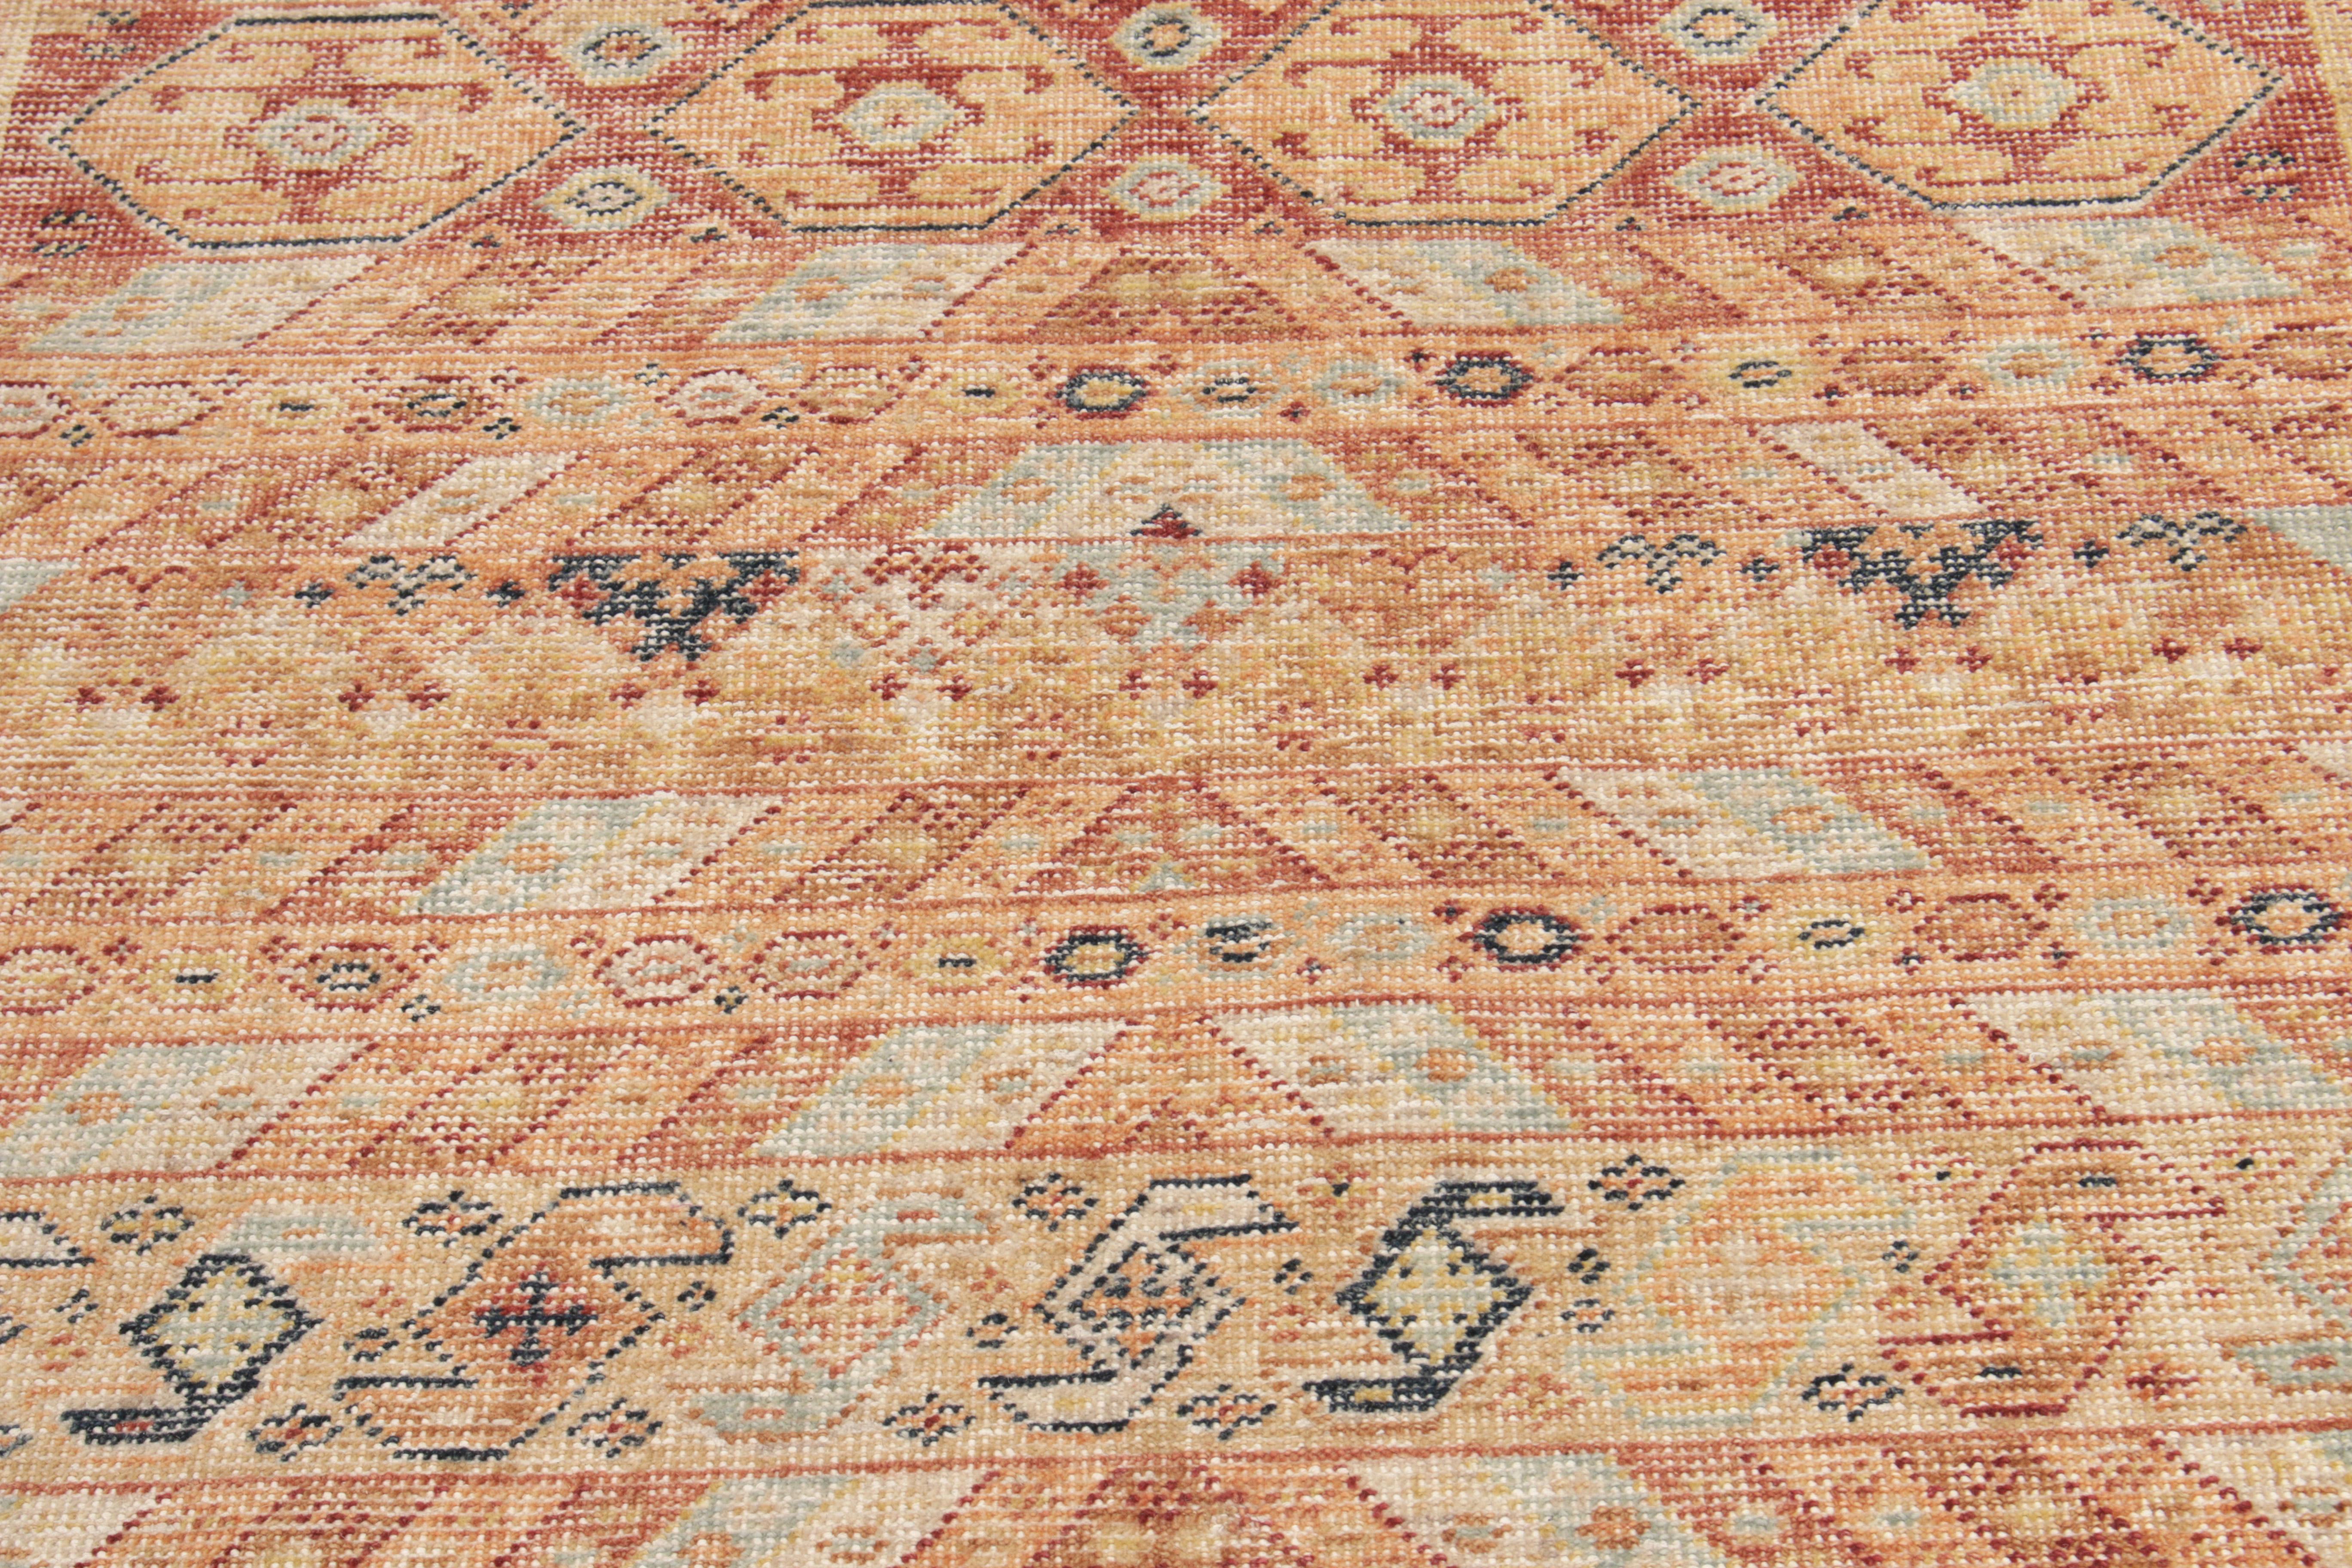 A 4x4 spectacle of nomadic aesthetics in distressed style, this square rug from our Homage Collection features a series of tribal patterns in tangerine, brick red & light-dark blue tones for a warm-cool colorplay harmoniously complementing the